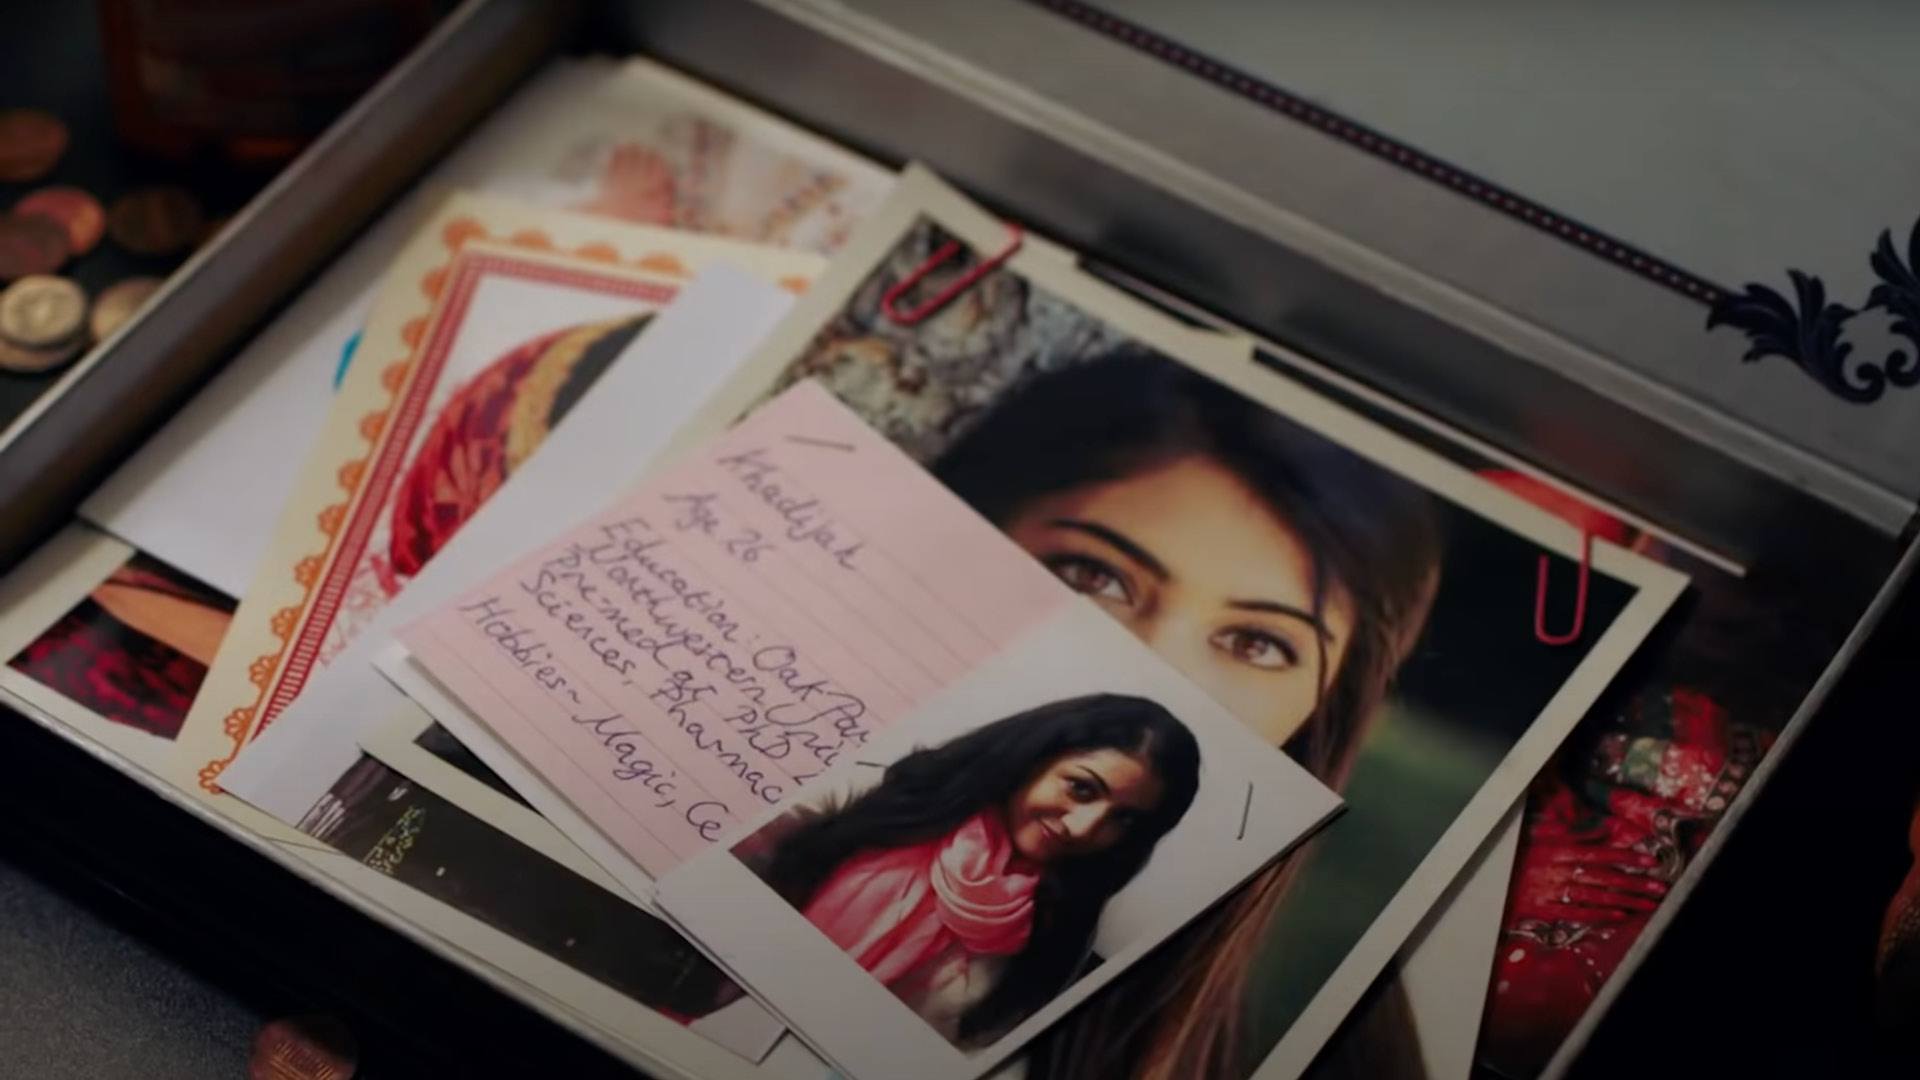 THE BIG SICK film still of a pile of photographs and notes